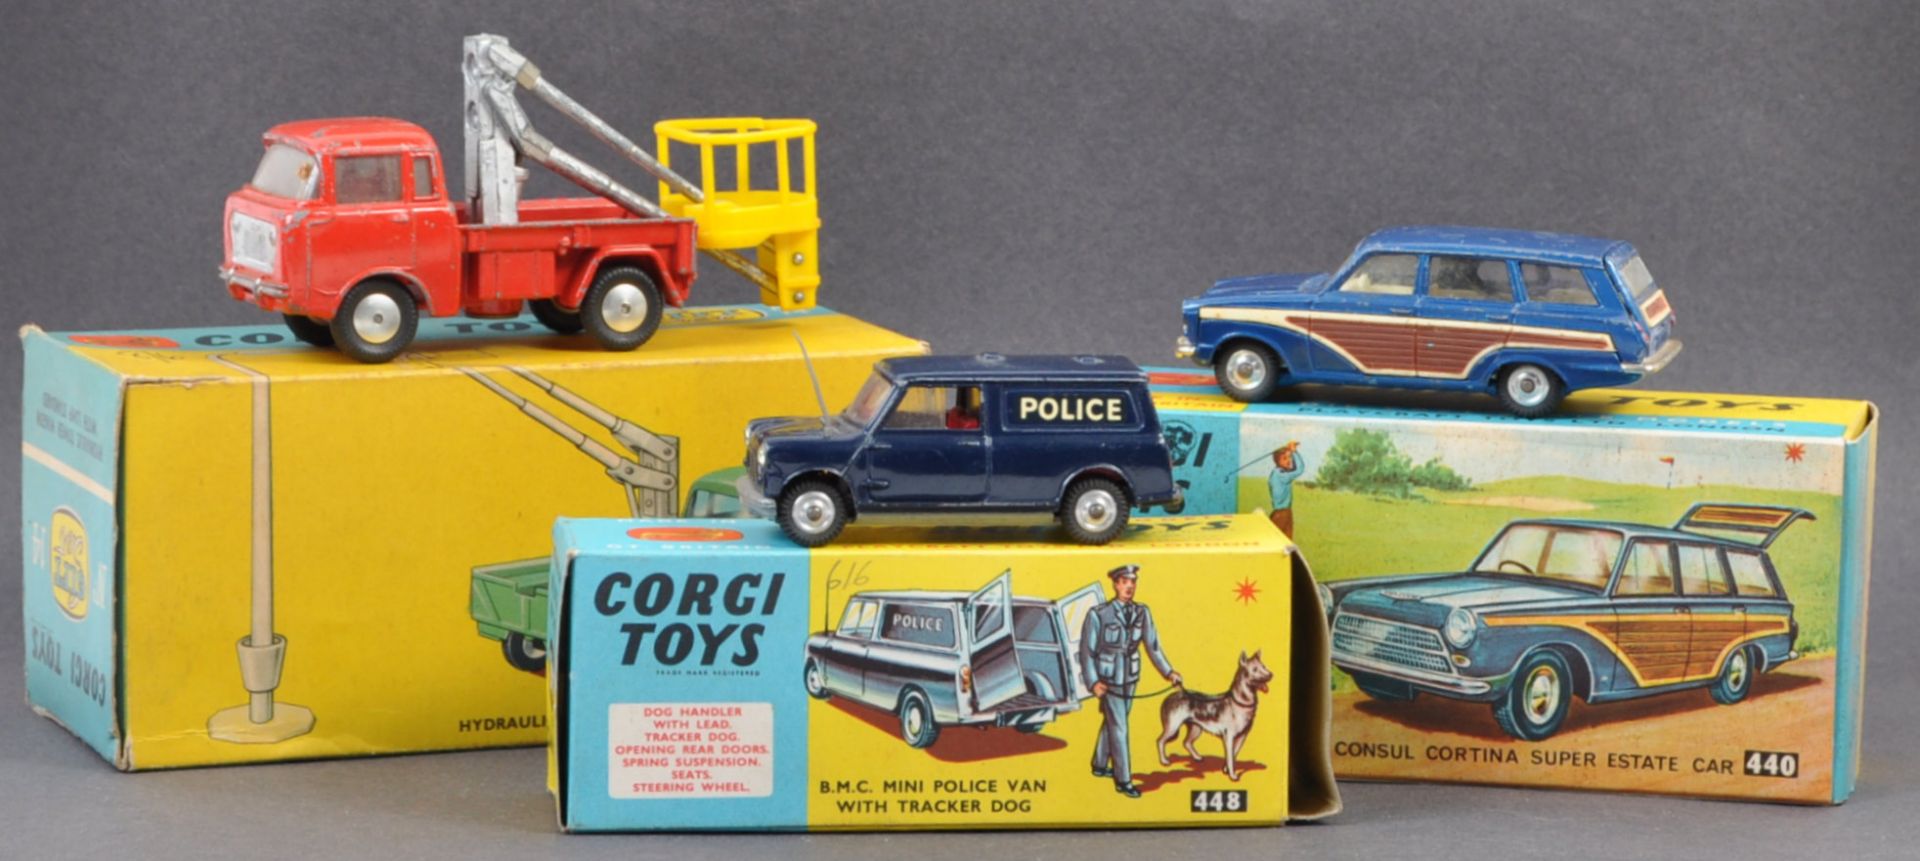 COLLECTION OF VINTAGE BOXED CORGI TOYS DIECAST MODELS